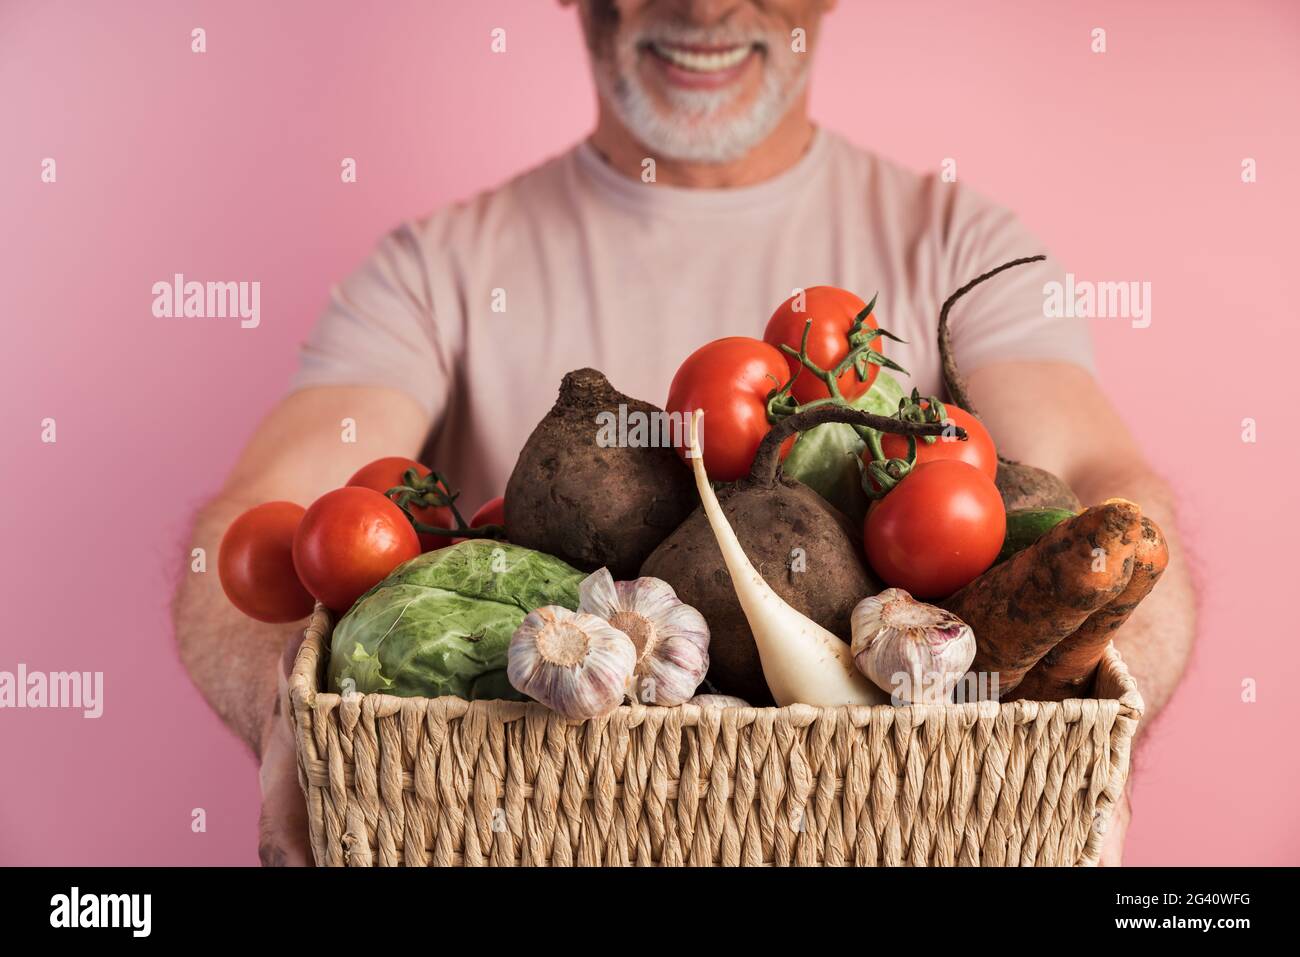 Close view, basket with vegetables, man holding fresh vegetables. Isolated on pink background, household concept., Close view, basket with vegetables, Stock Photo